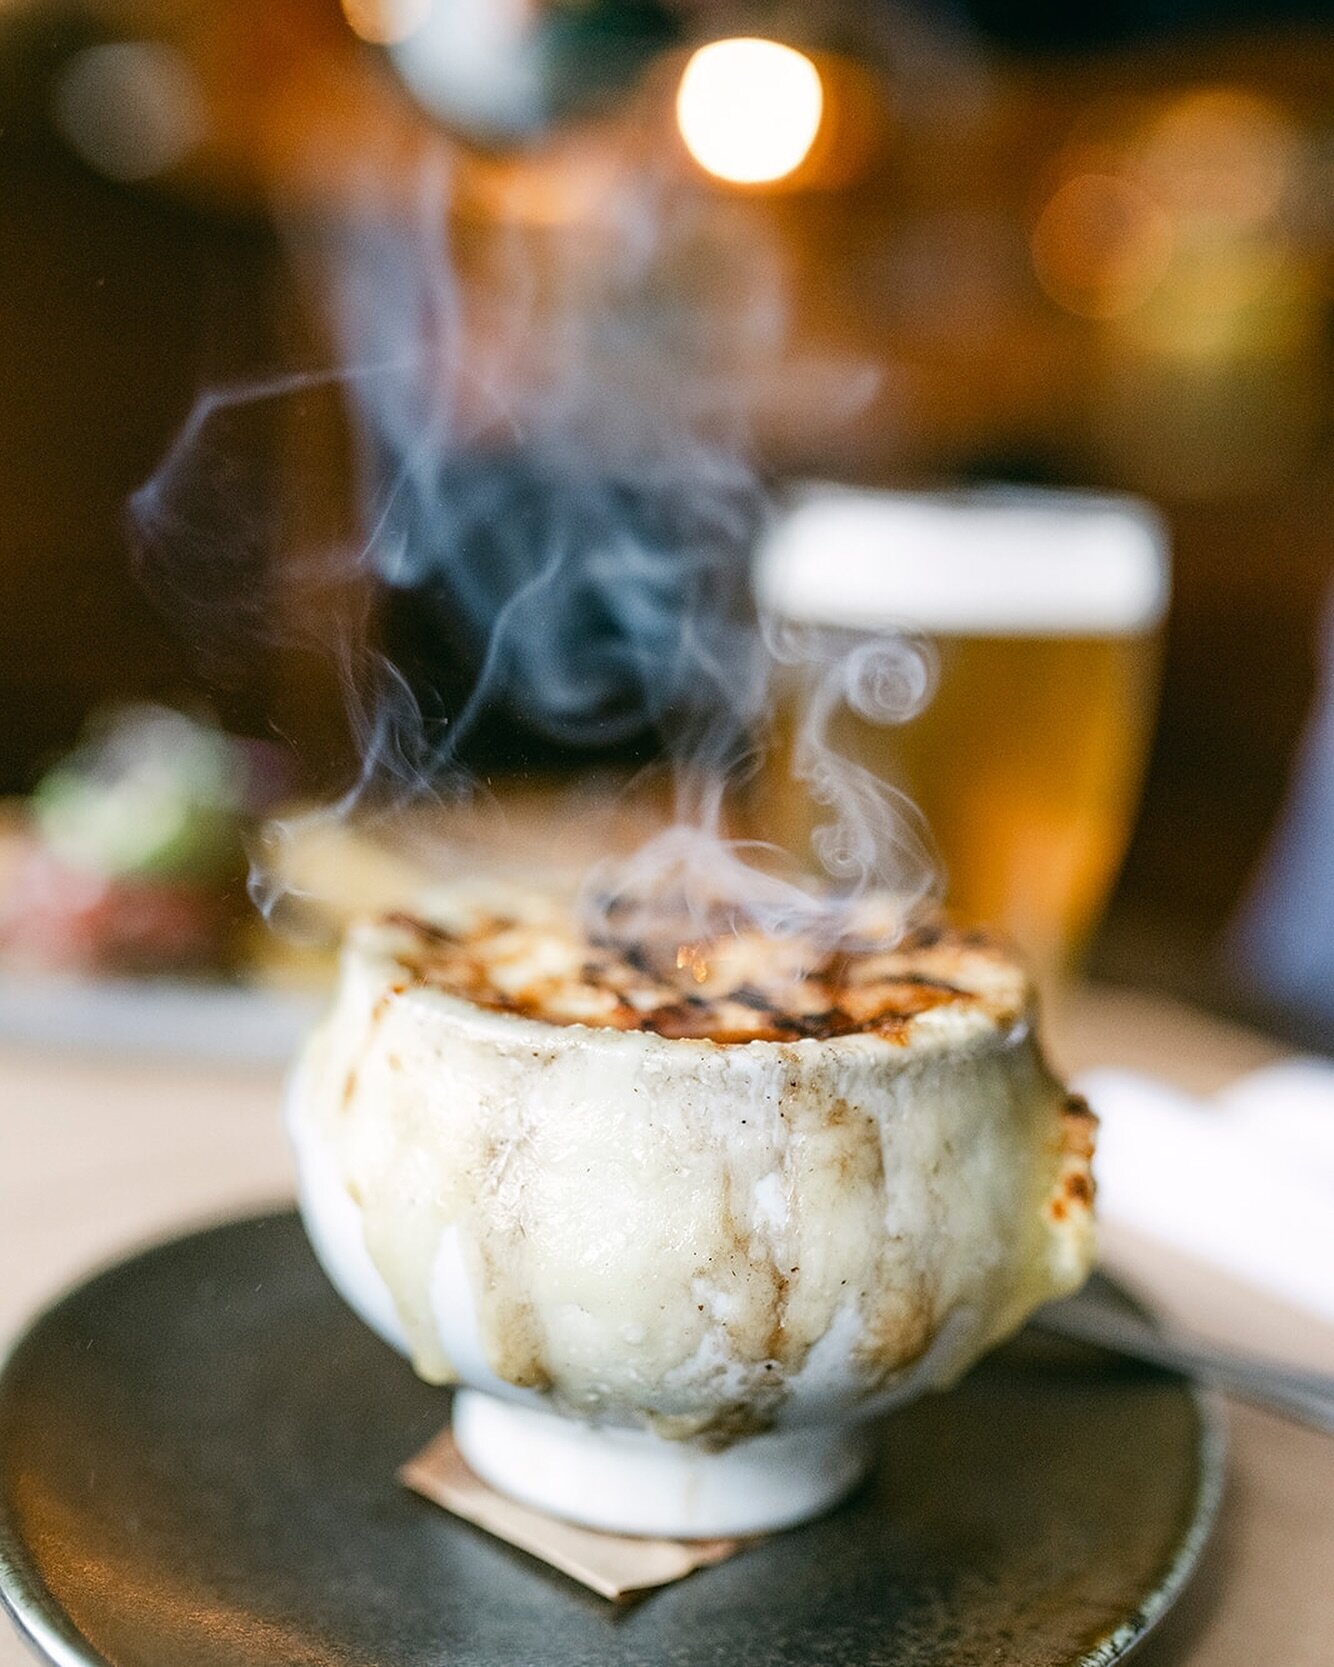 The Fire is on 🔥

Perfect Night for French Onion Soup! 

Open at 5 PM, Happy Hour until 6 PM at the Bar!

#oldfieldsofgreenlawn